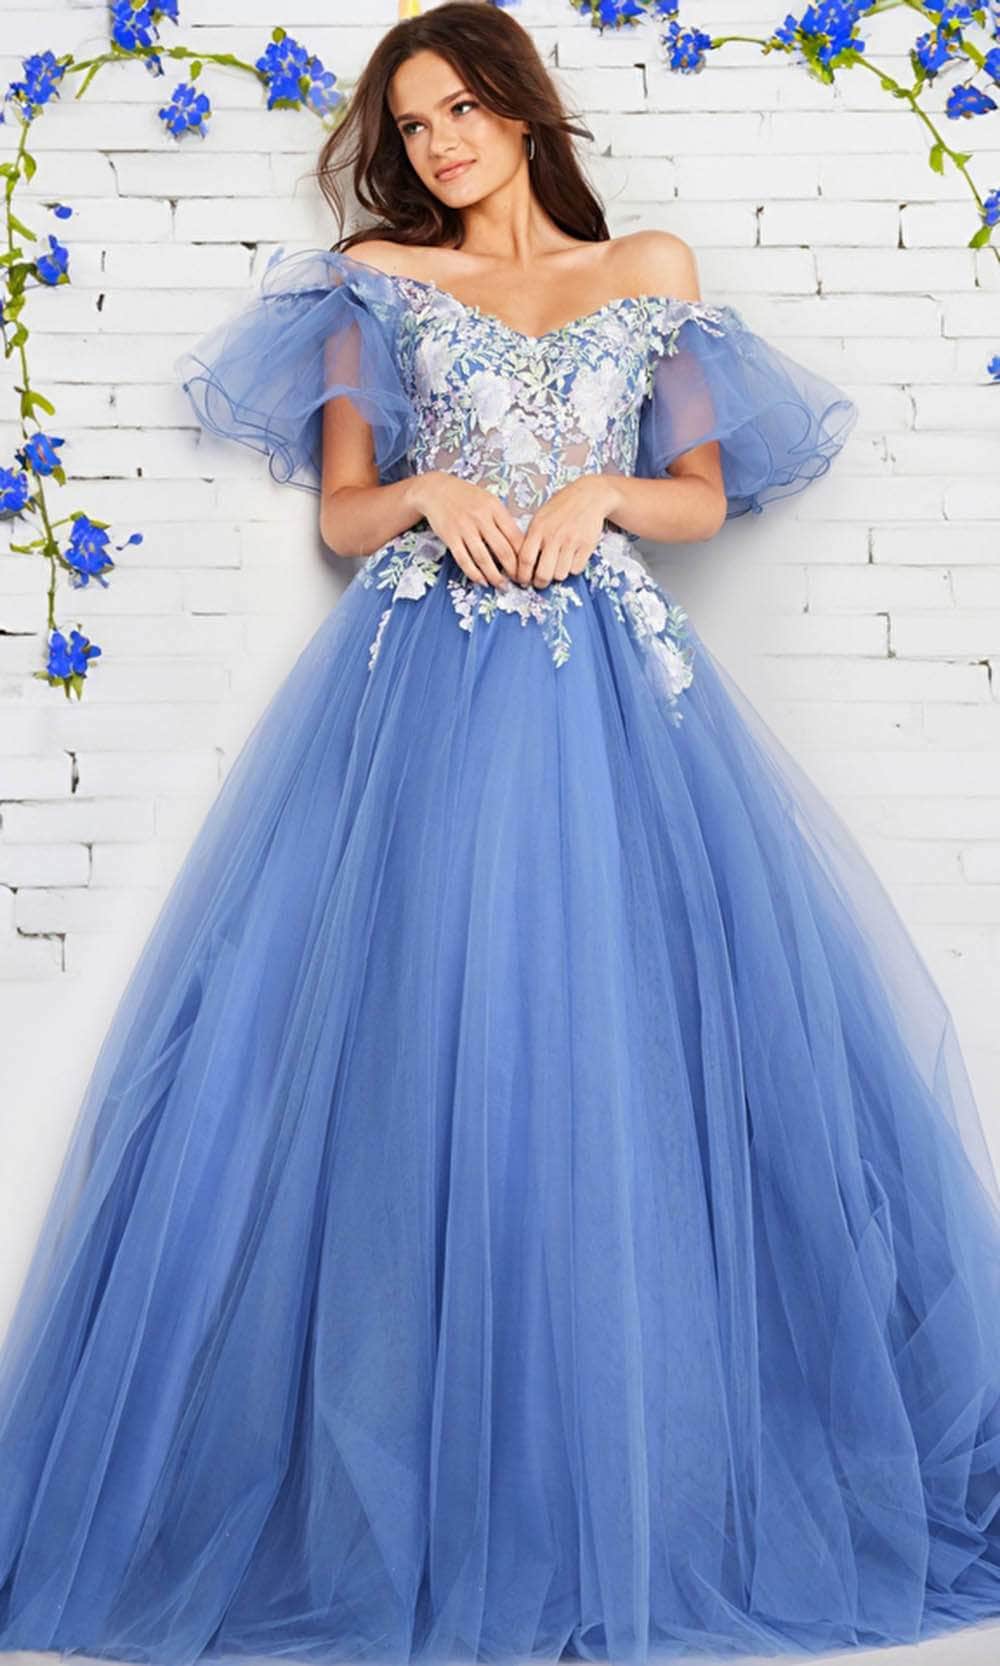 Image of Jovani 24575 - Tulle Butterfly Sleeves Floral Ballgown